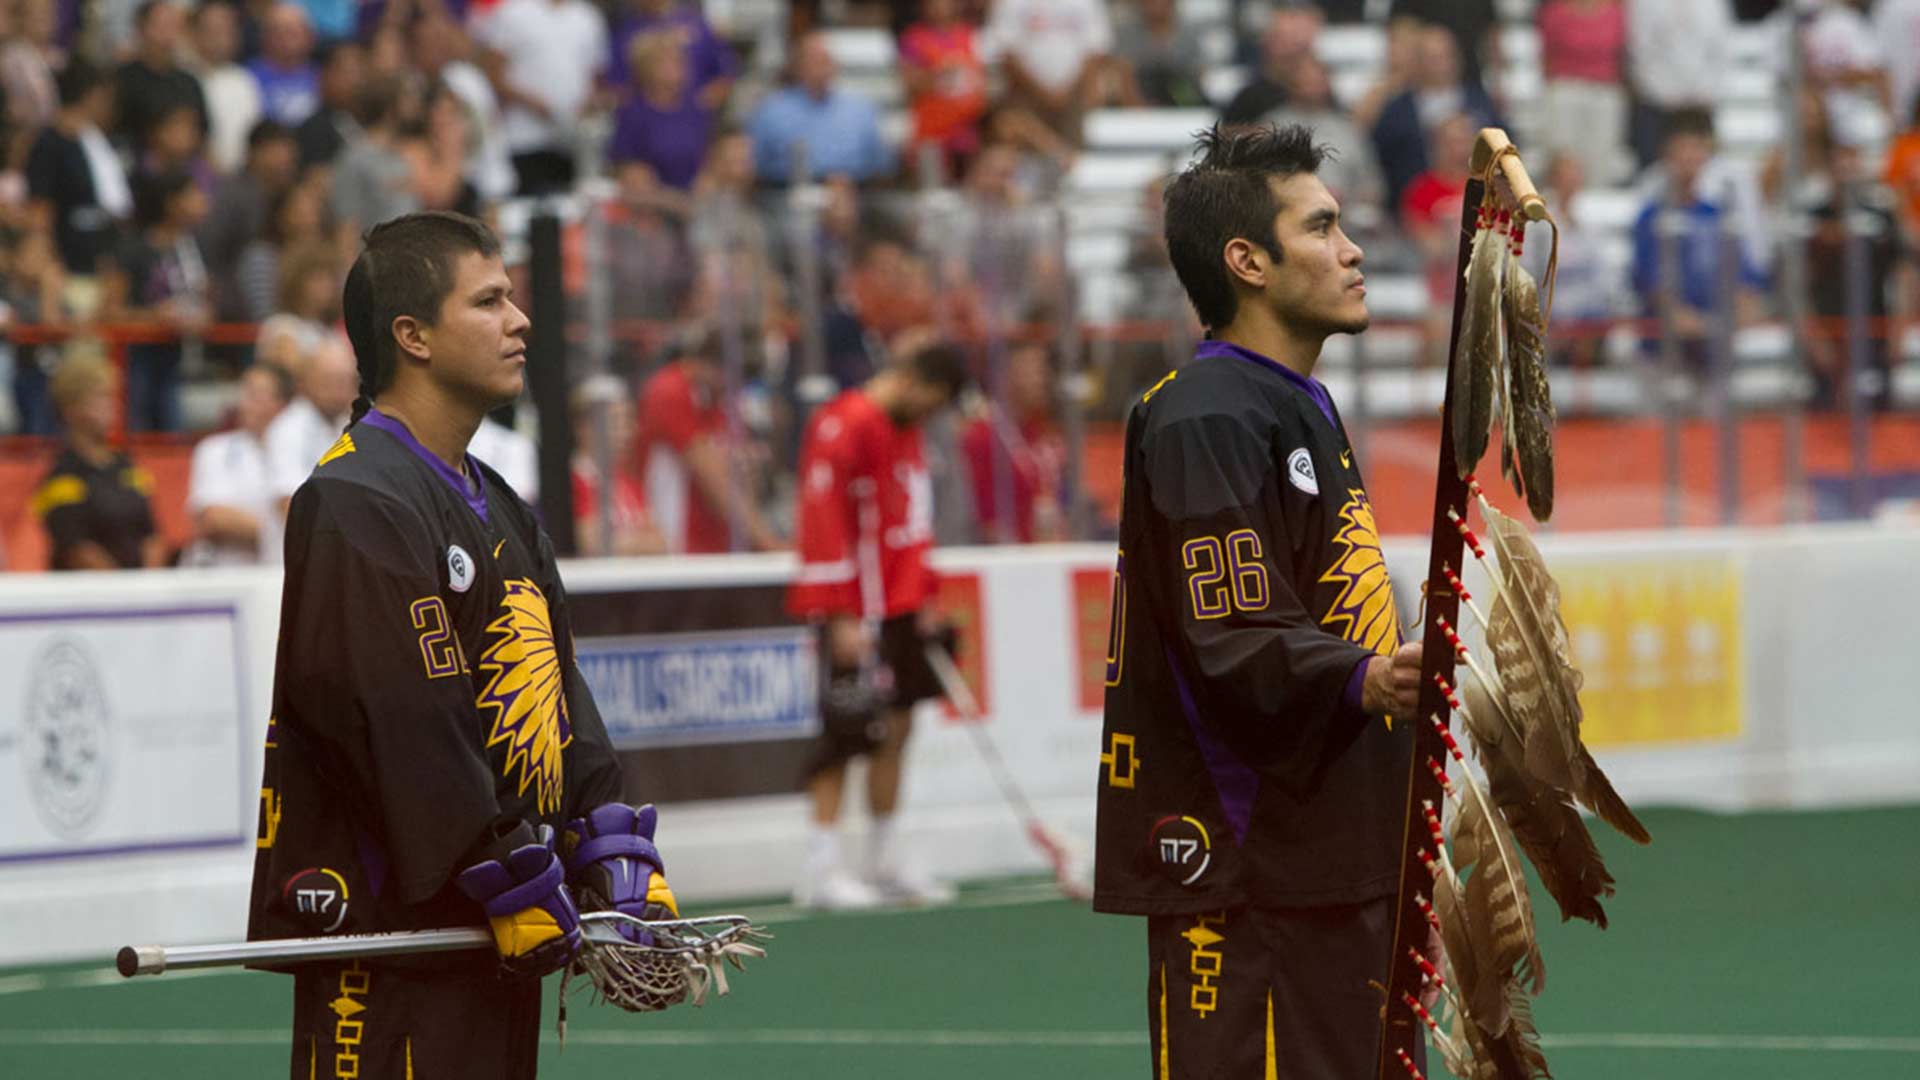 Lacrosse associations pushing for inclusion of Iroquois Nationals at